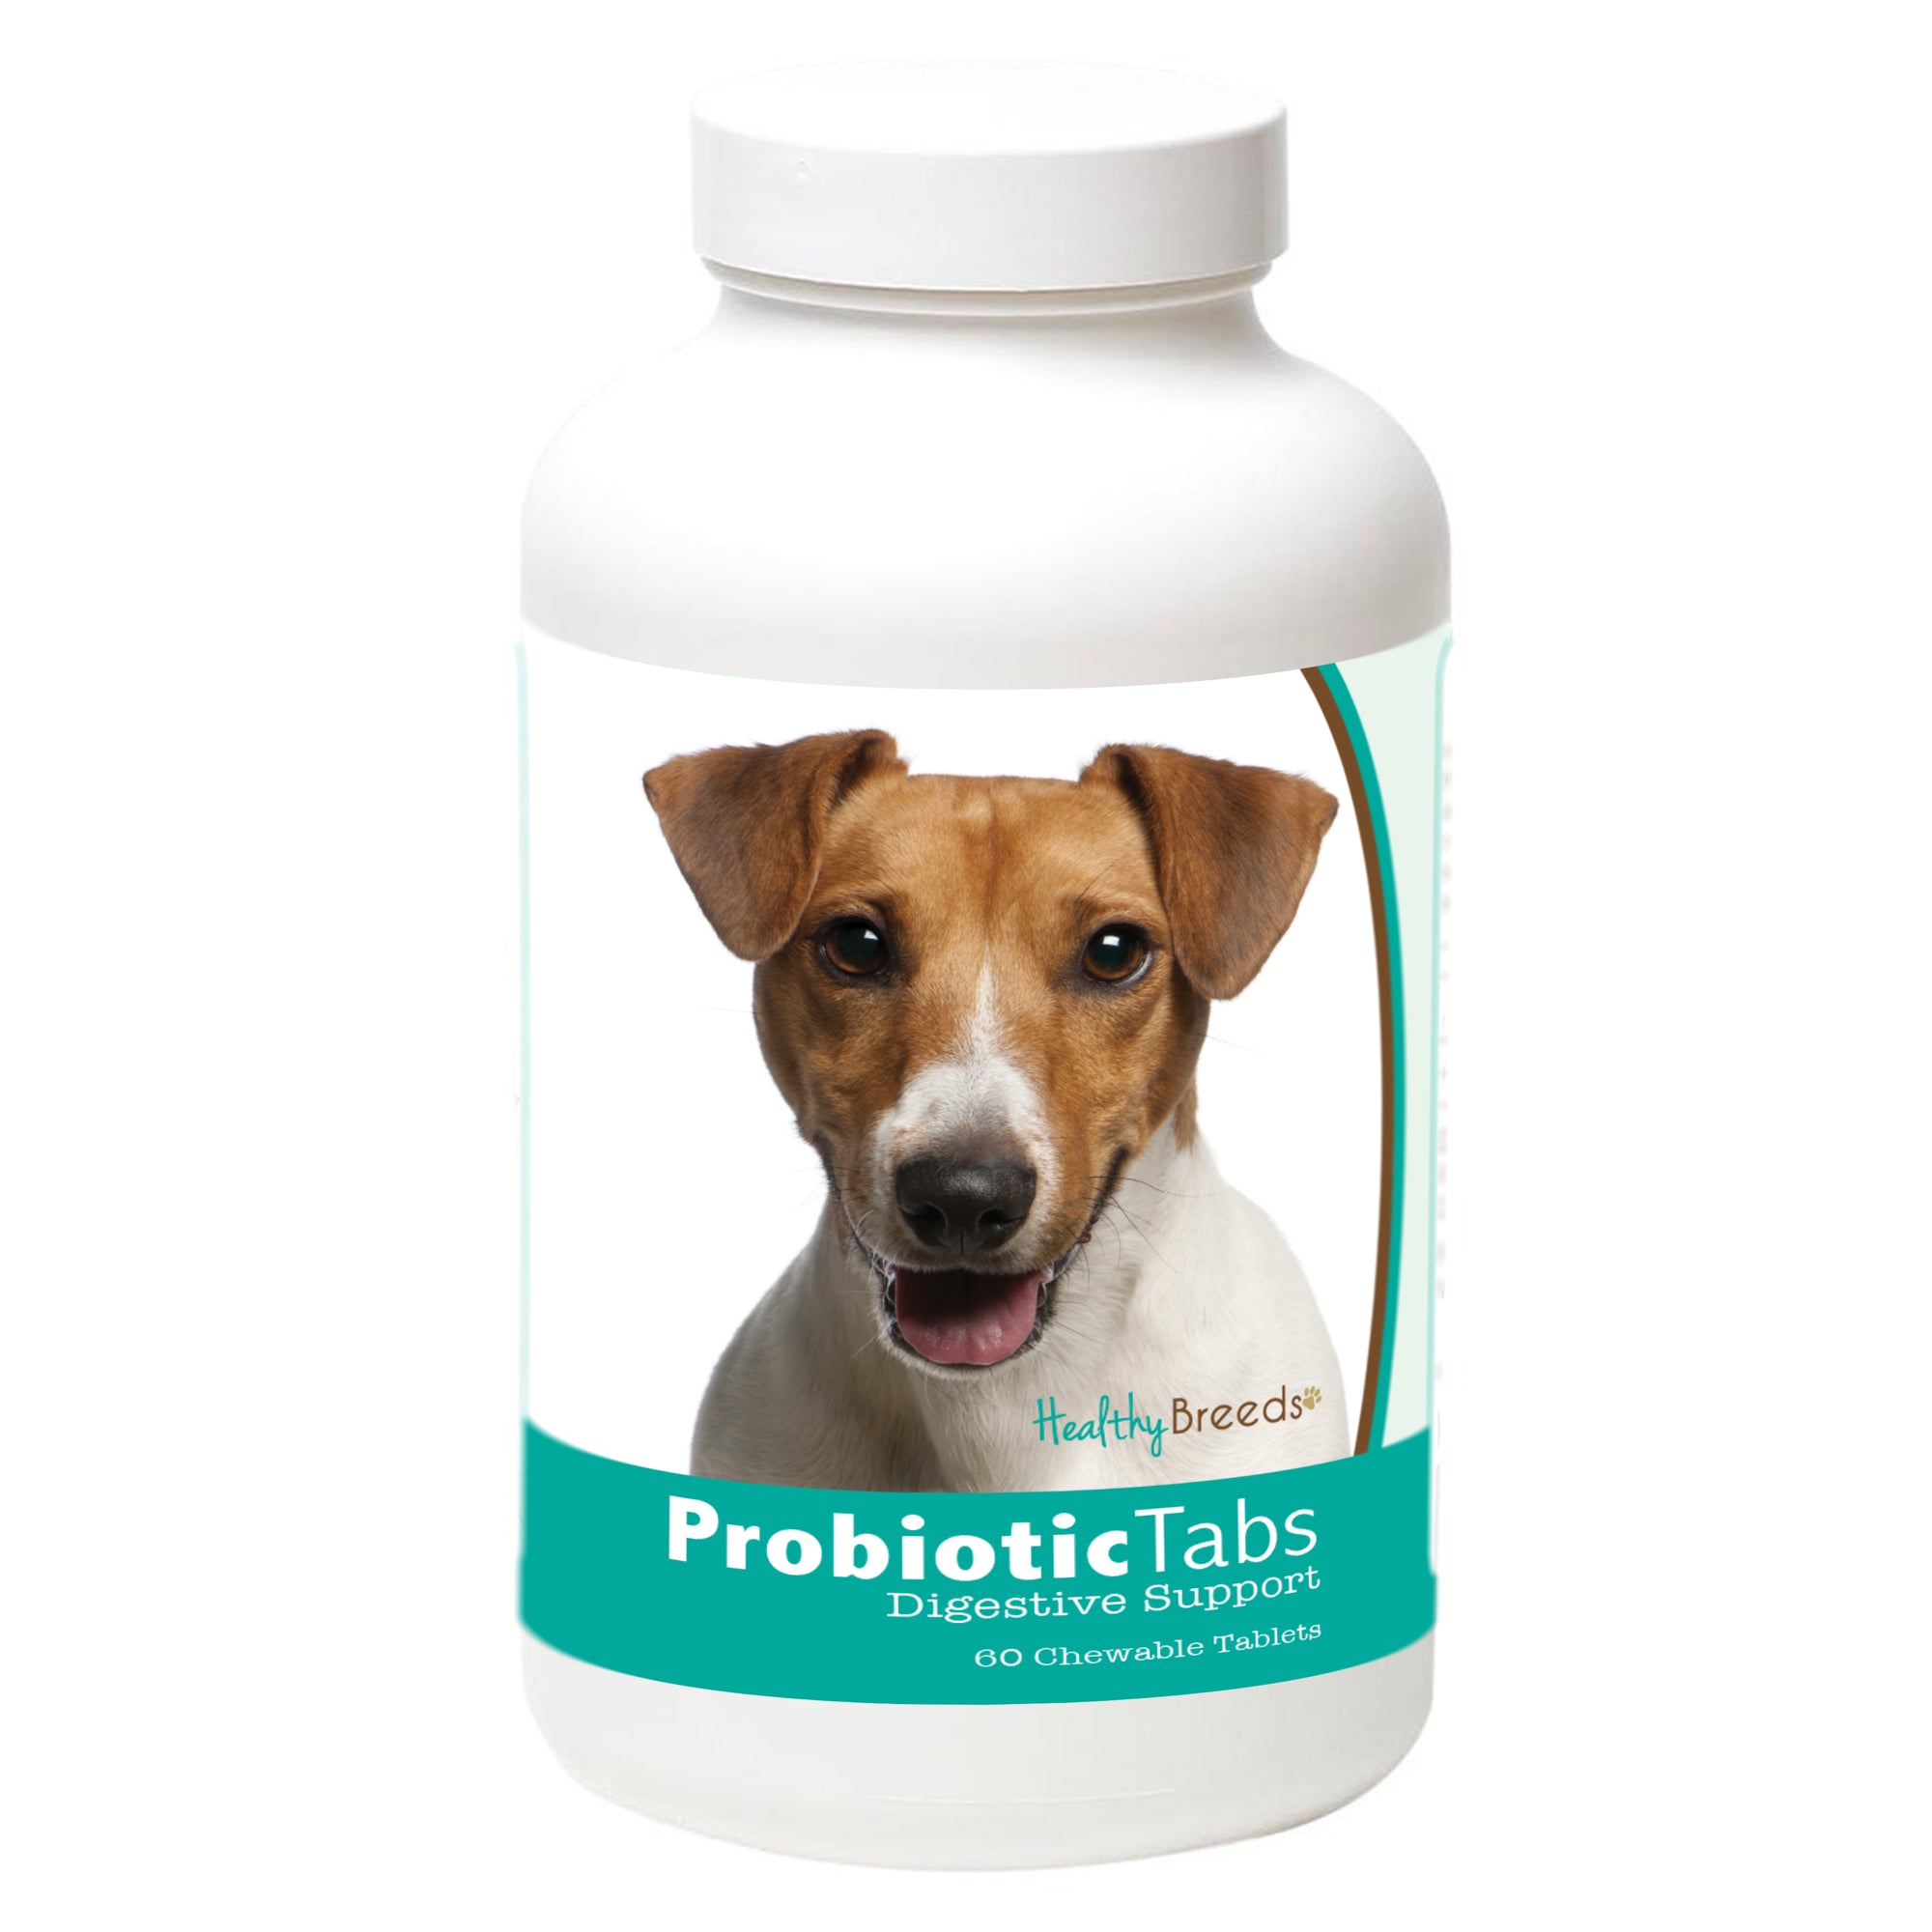 Healthy Breeds Jack Russell Terrier Probiotic and Digestive Support for Dogs 60 Count